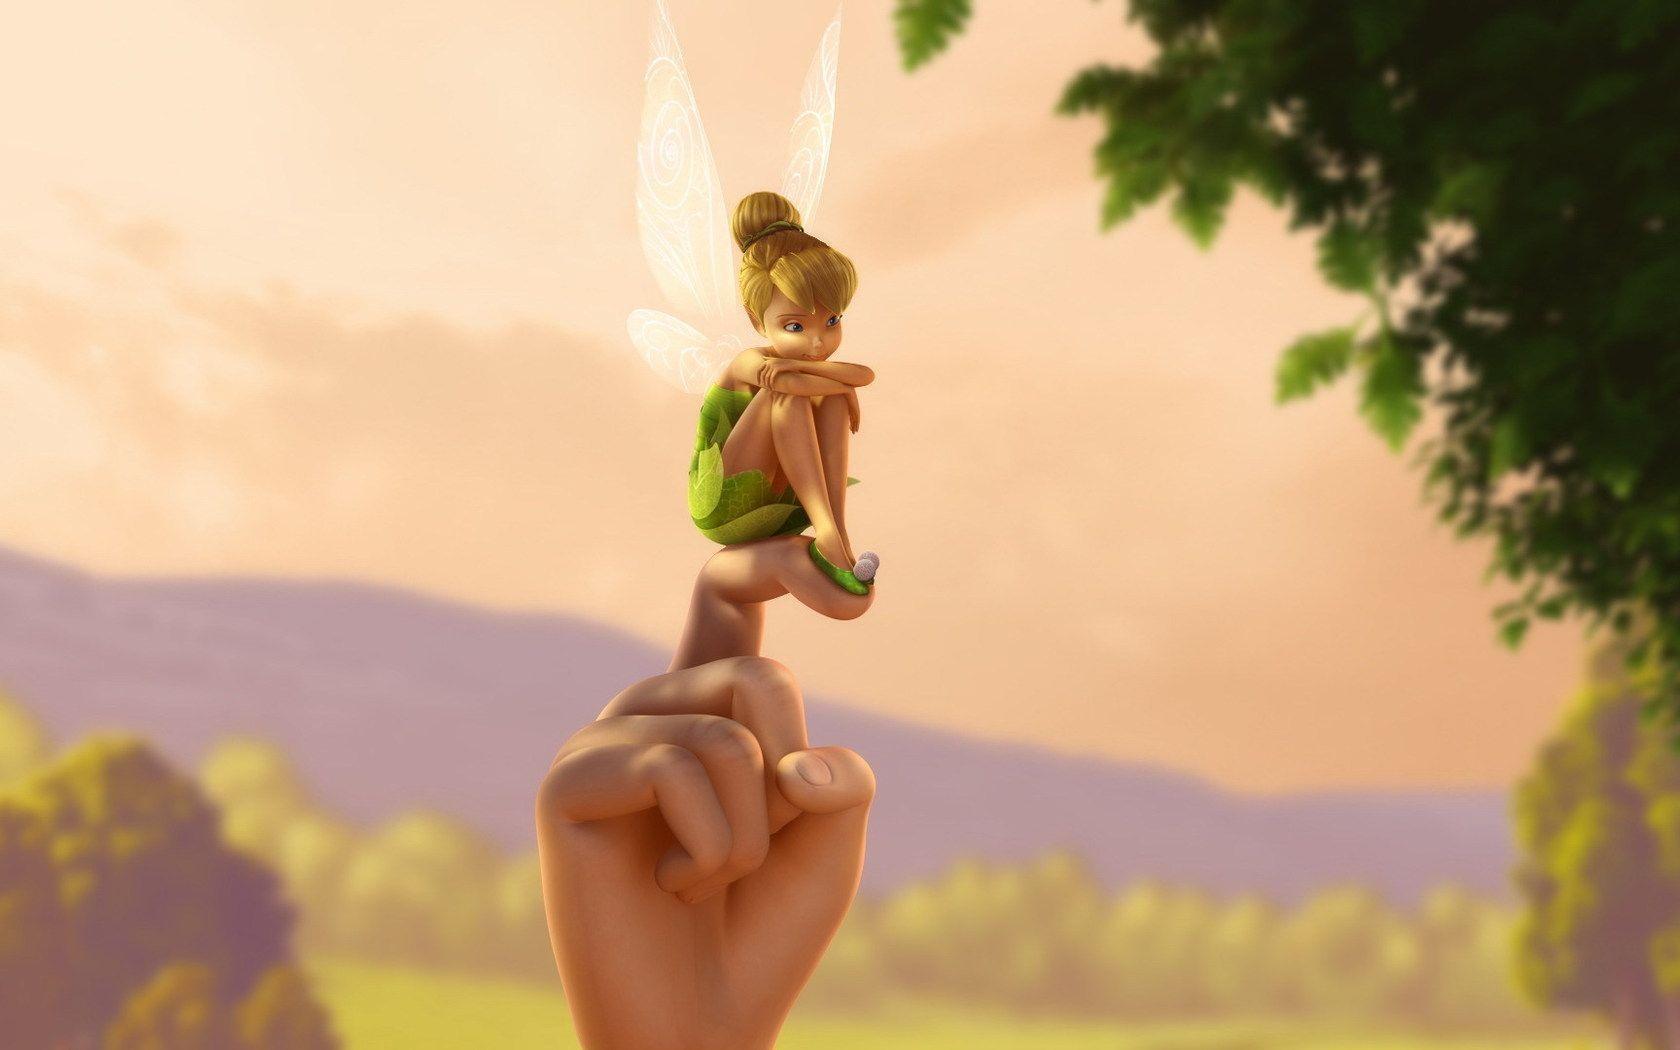 Tinkerbell Iphone Wallpapers